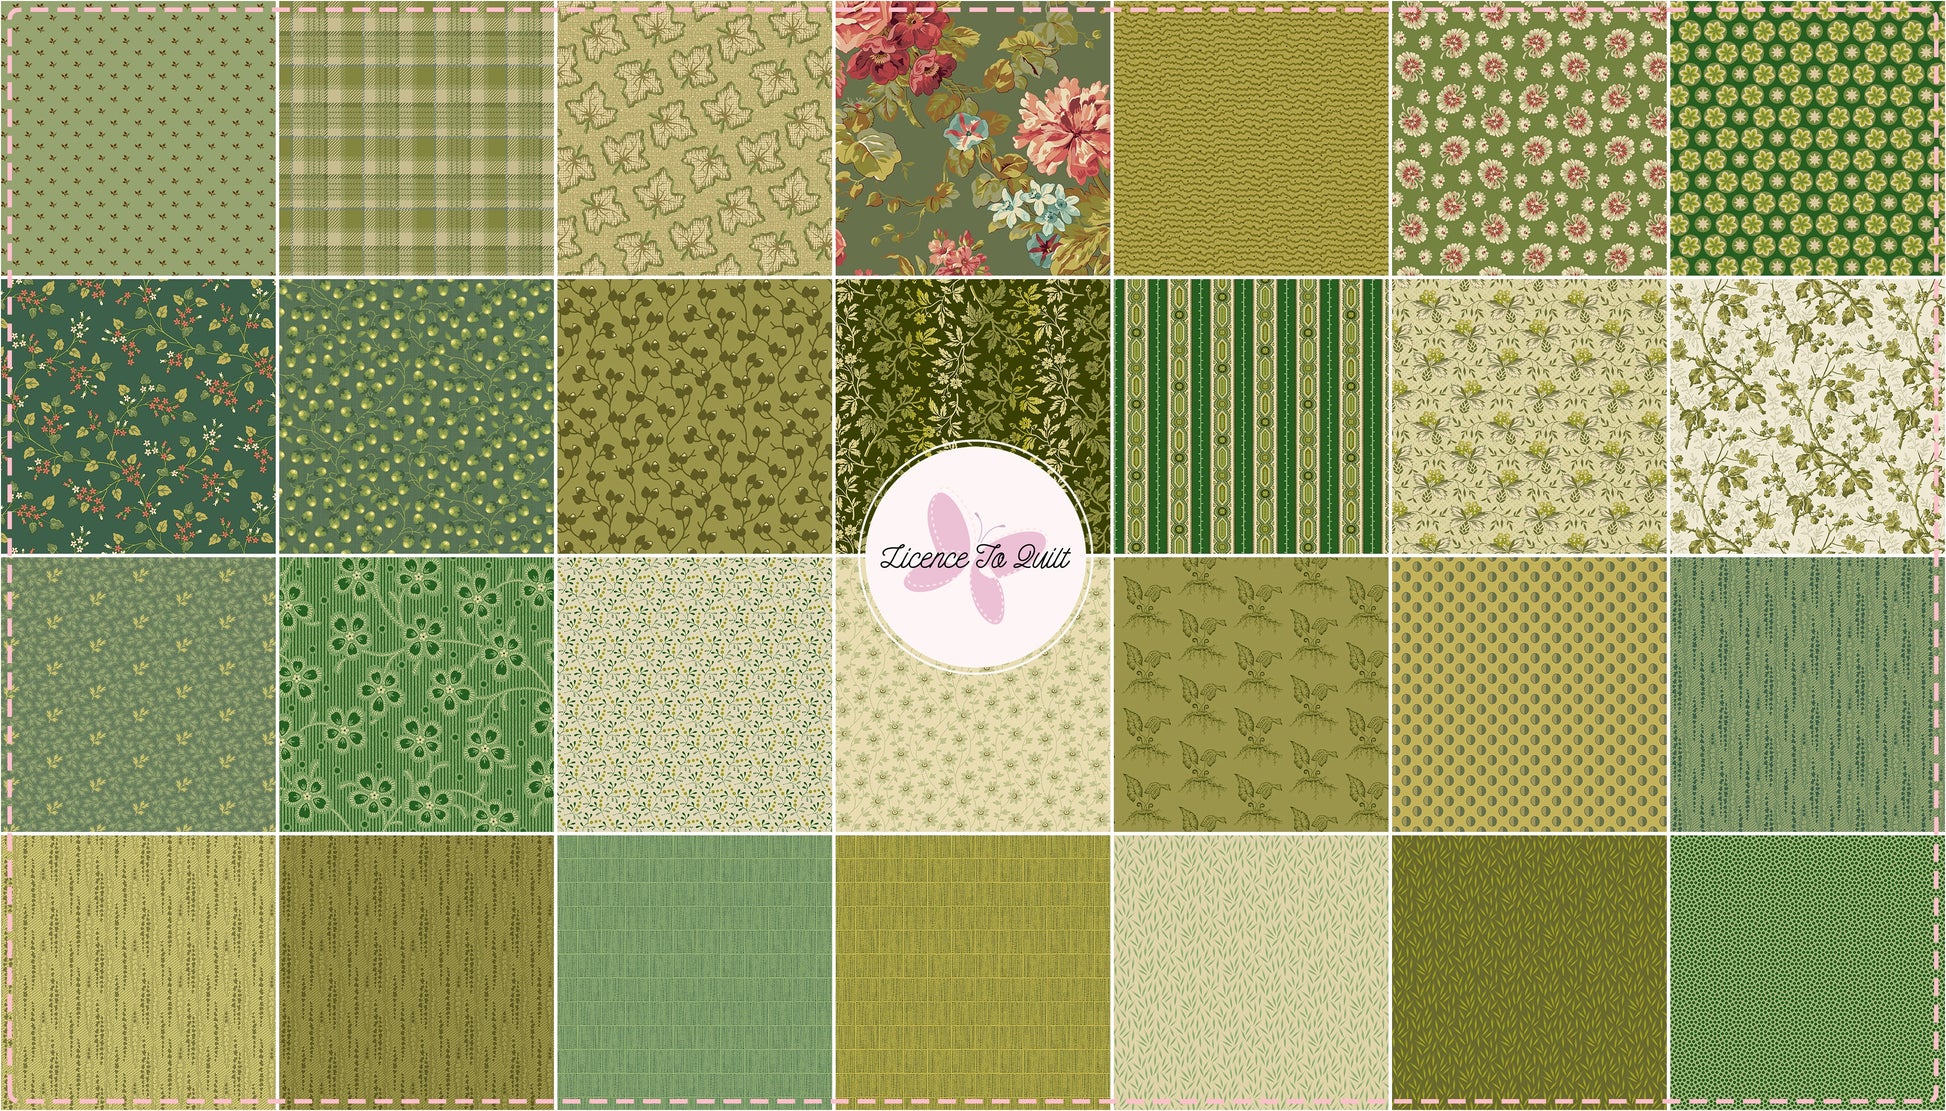 Green Thumb - Moss Emerald - Licence To Quilt